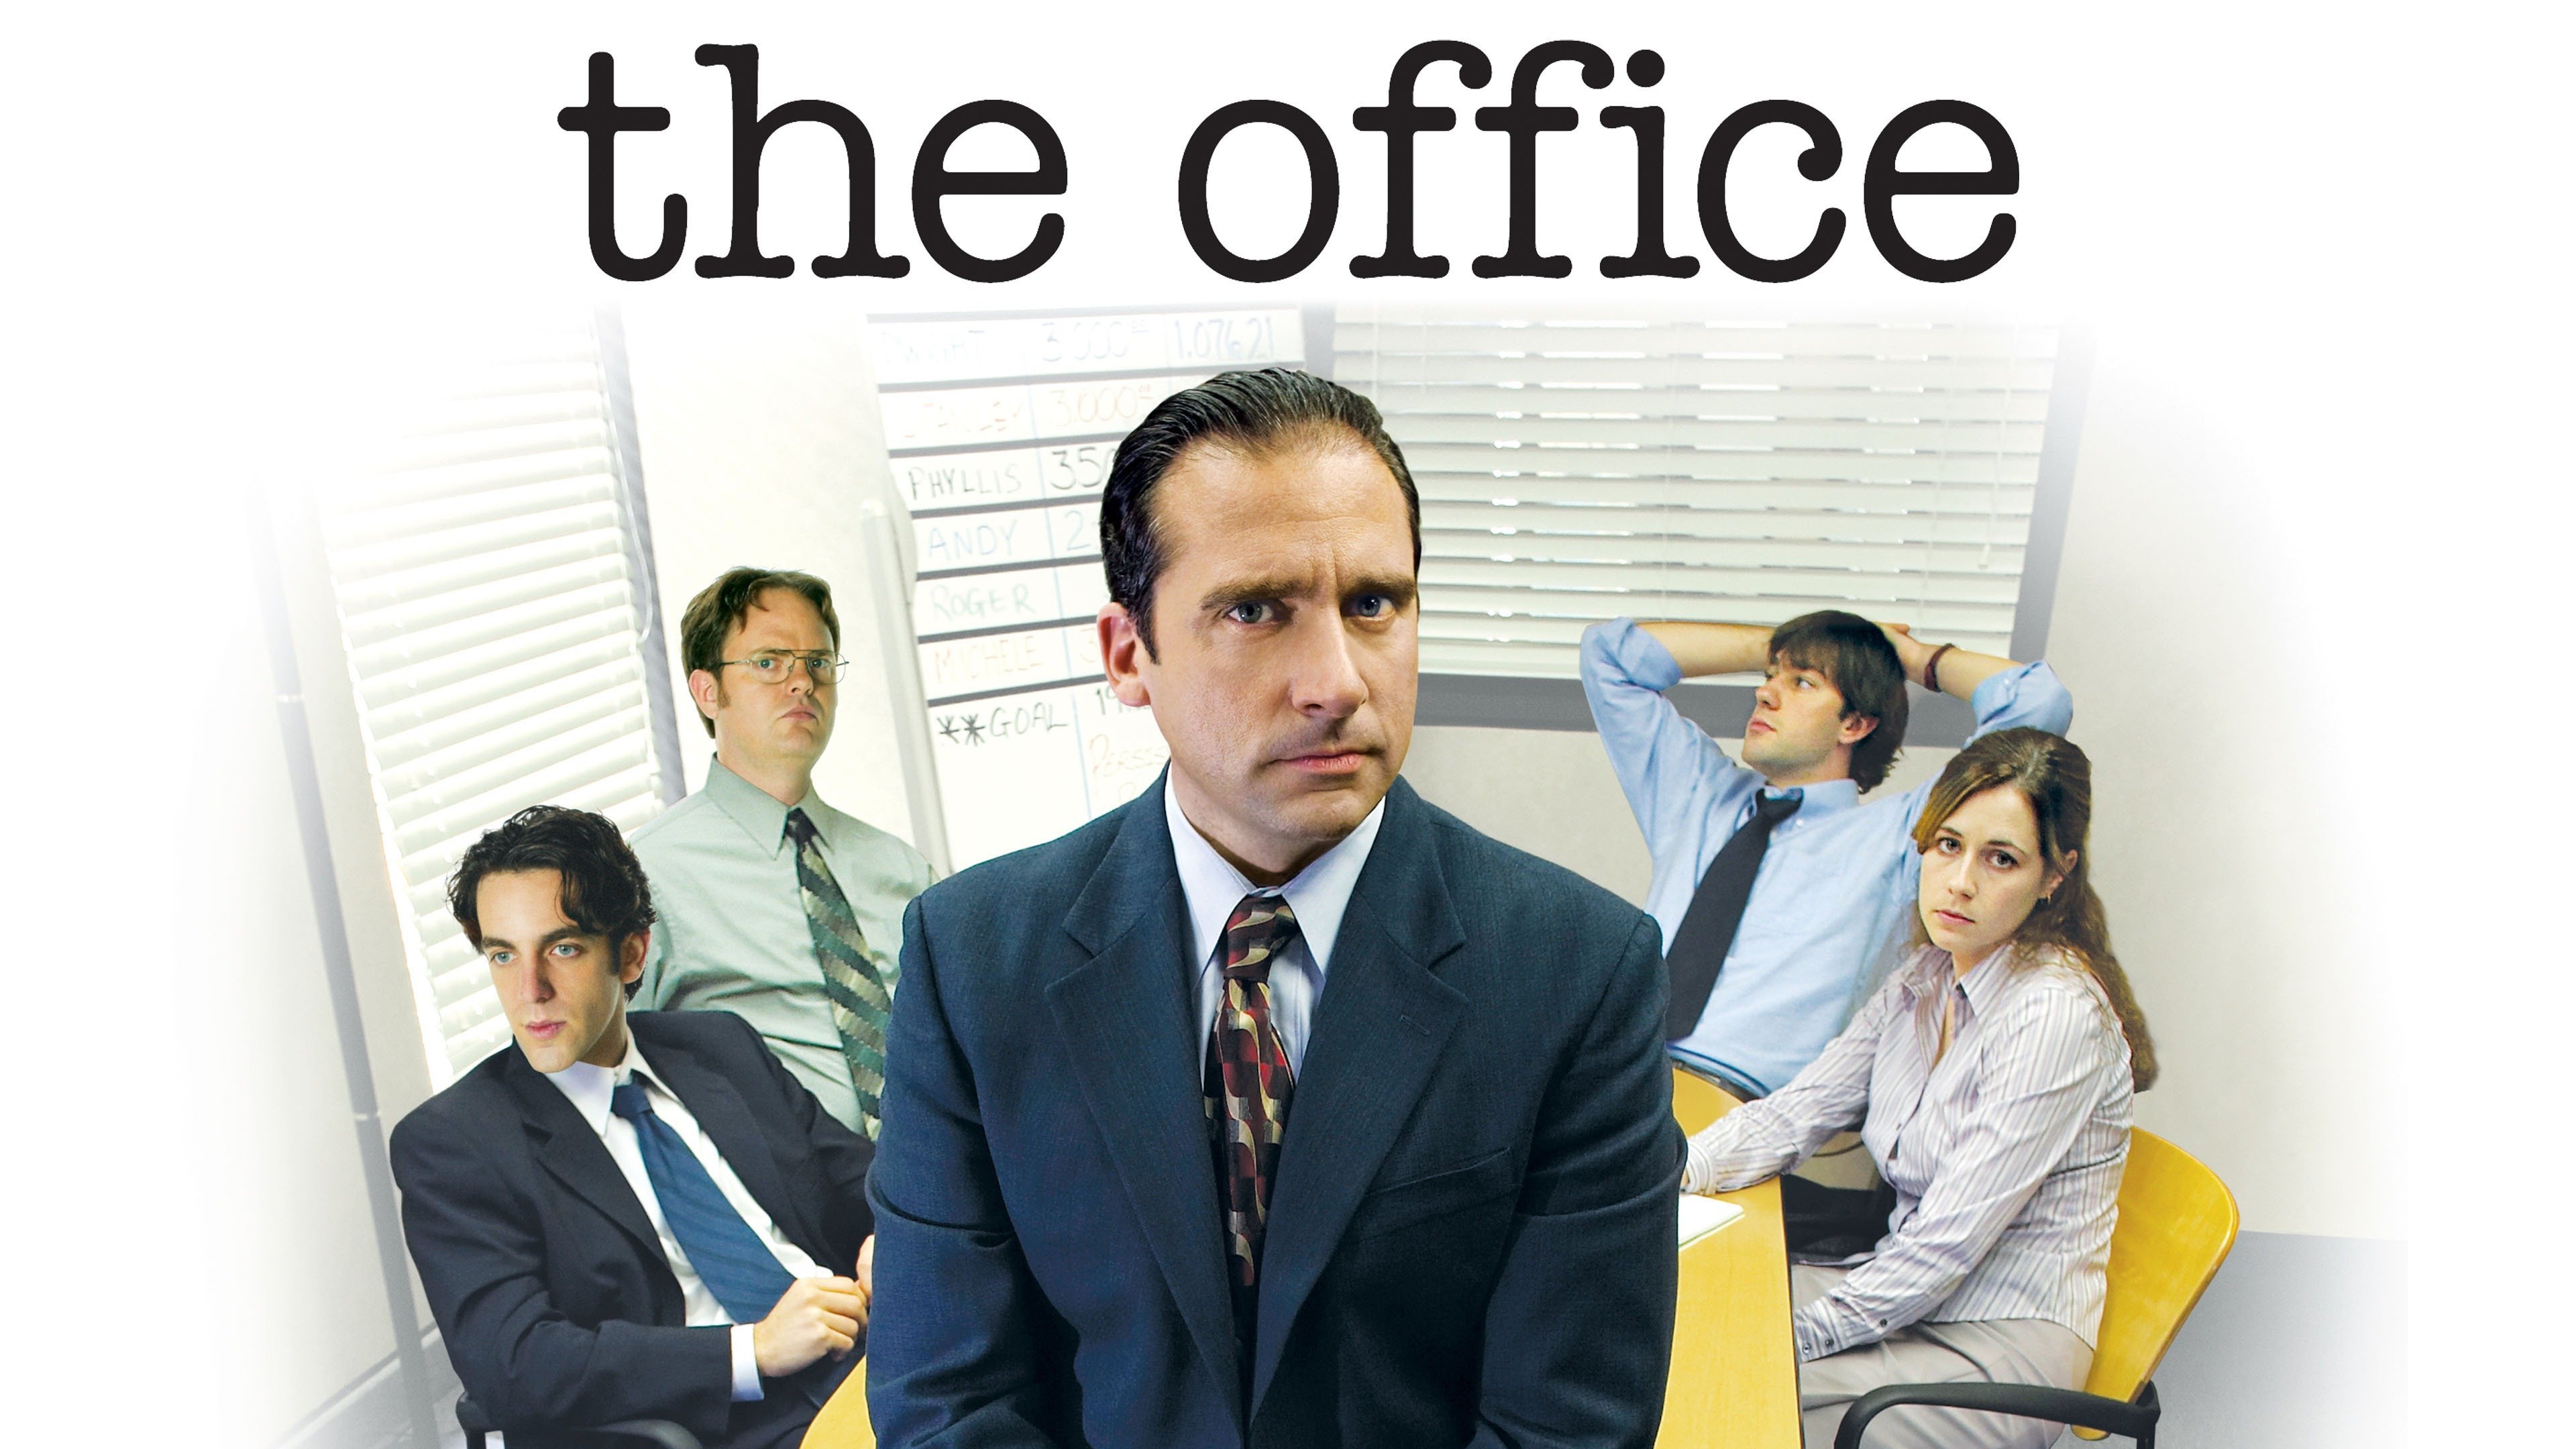 The Office: Season 1  Where to watch streaming and online in New